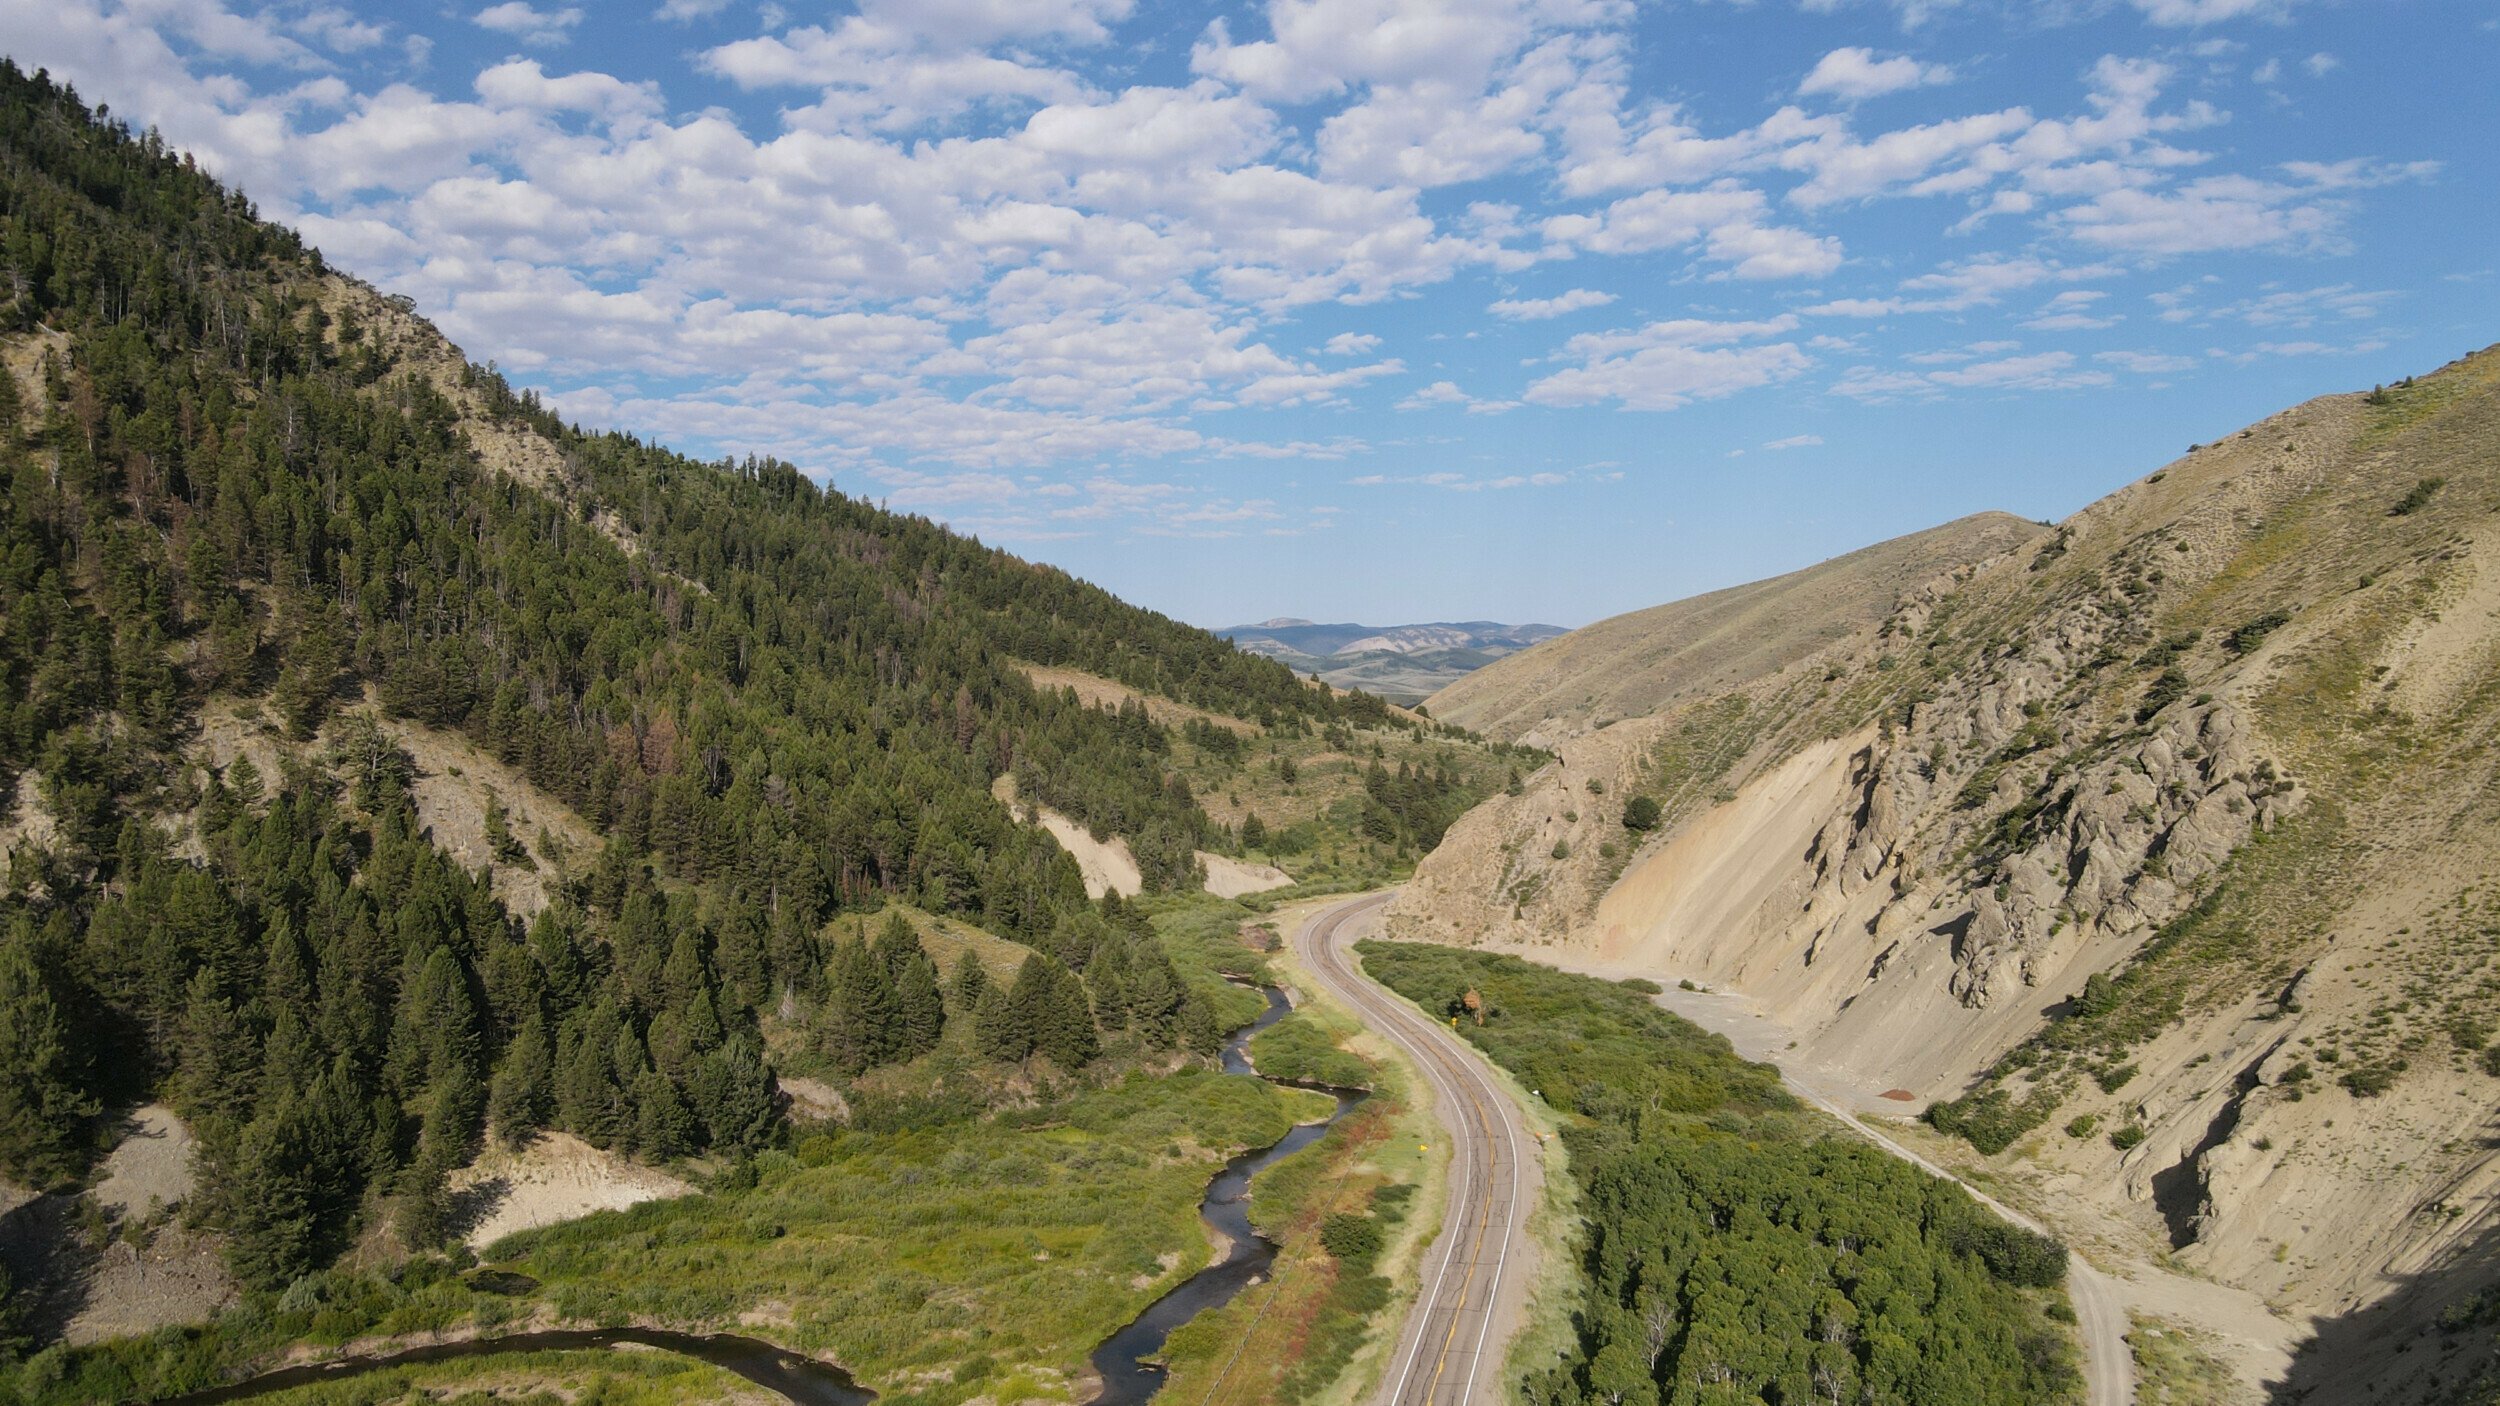 An aerial view of a road near a river at the Idaho-Wyoming border showcases the area's landscape of forests and open skies.